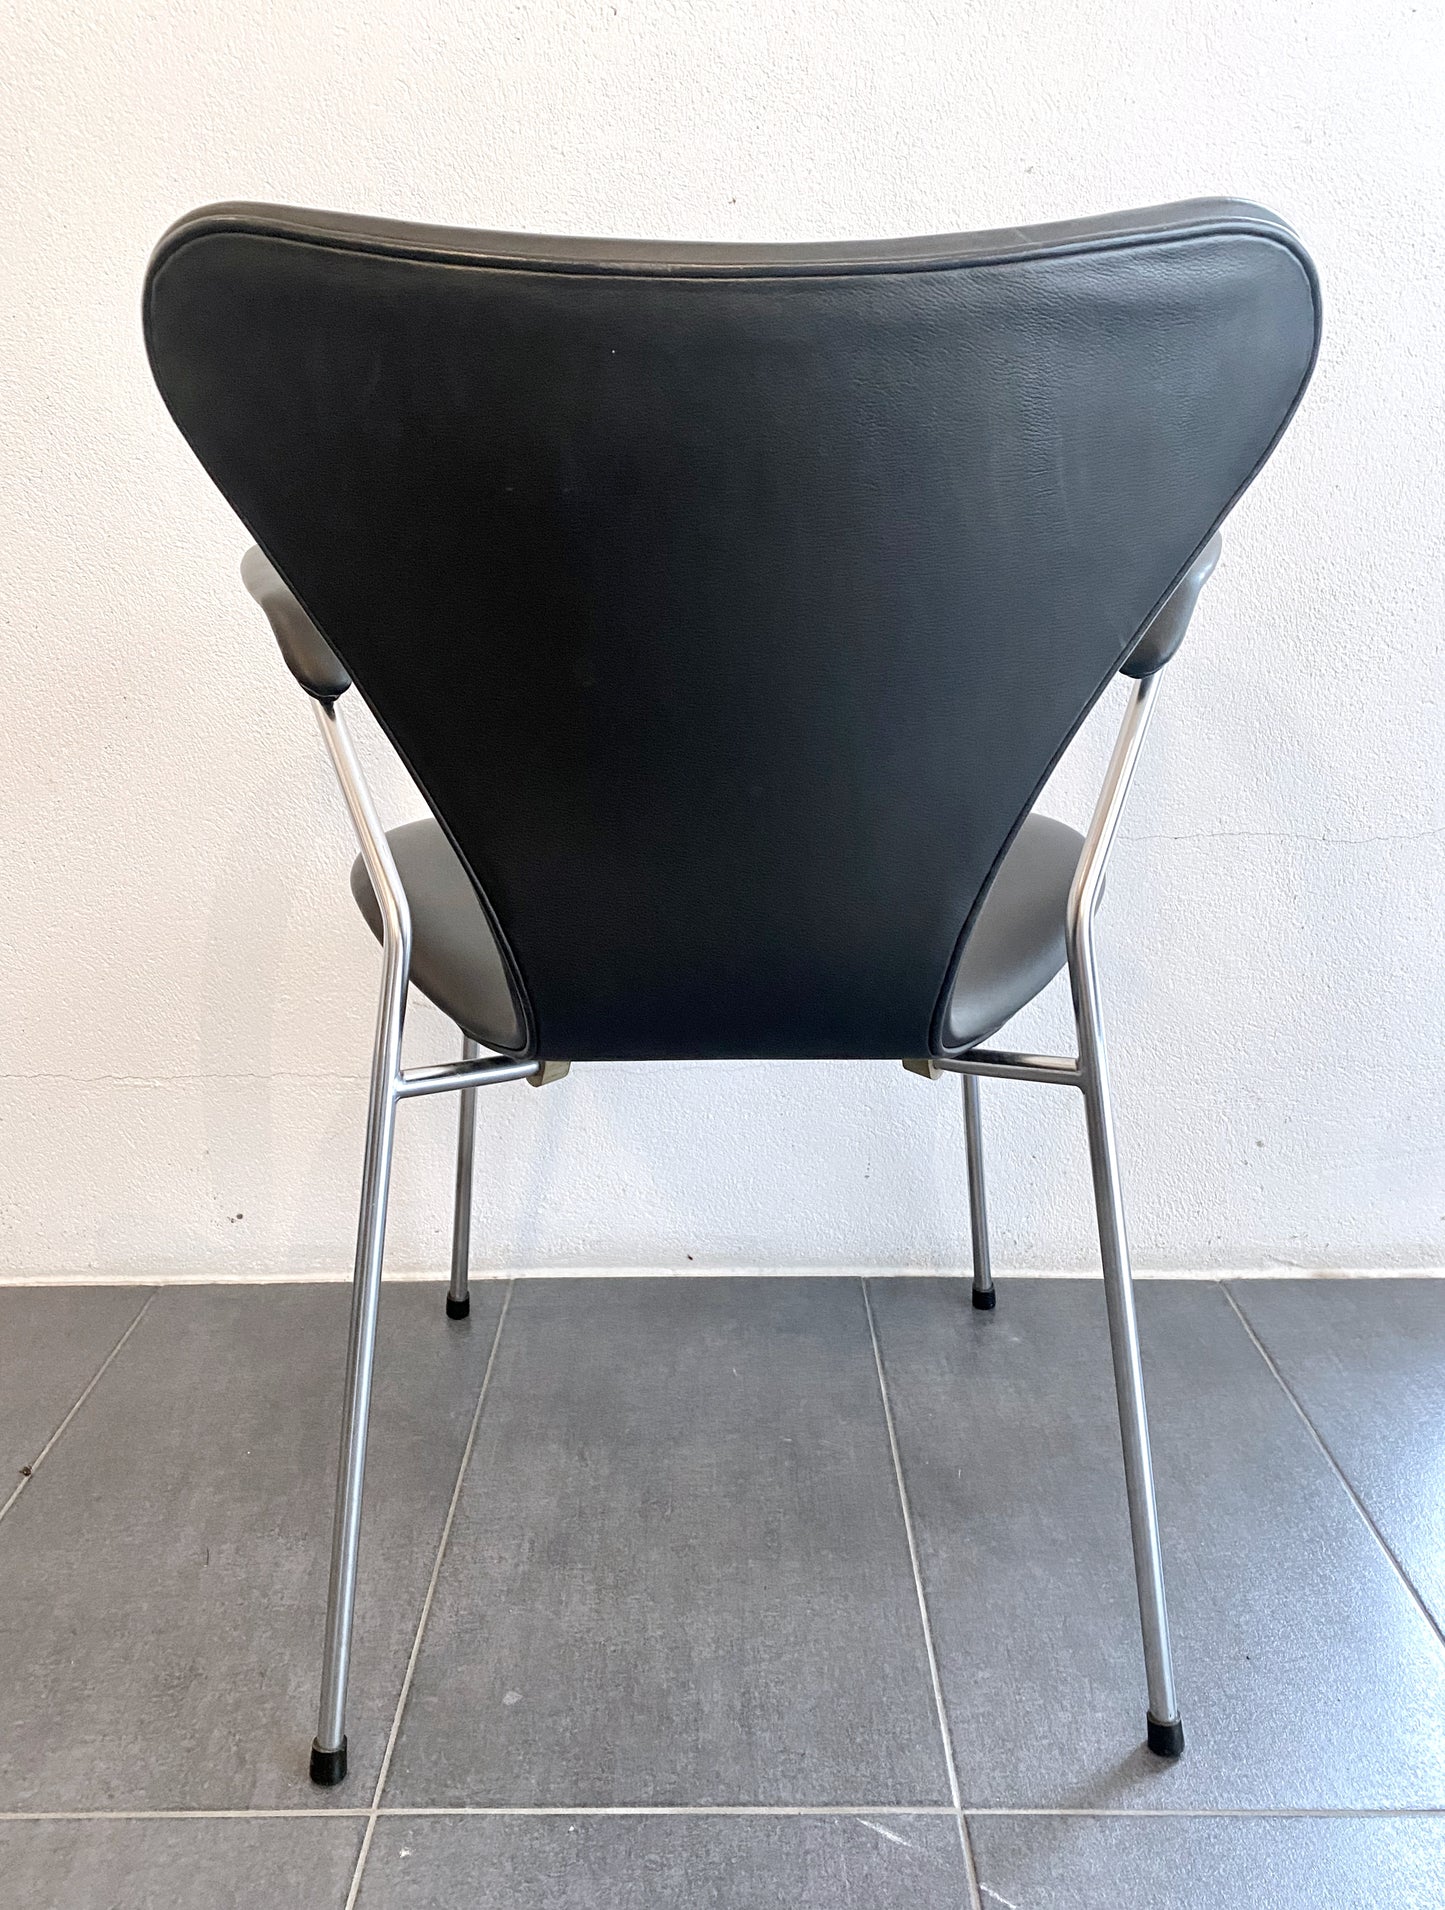 Arne Jacobsen - Set of 6 Seven chairs in black leather and with armrests